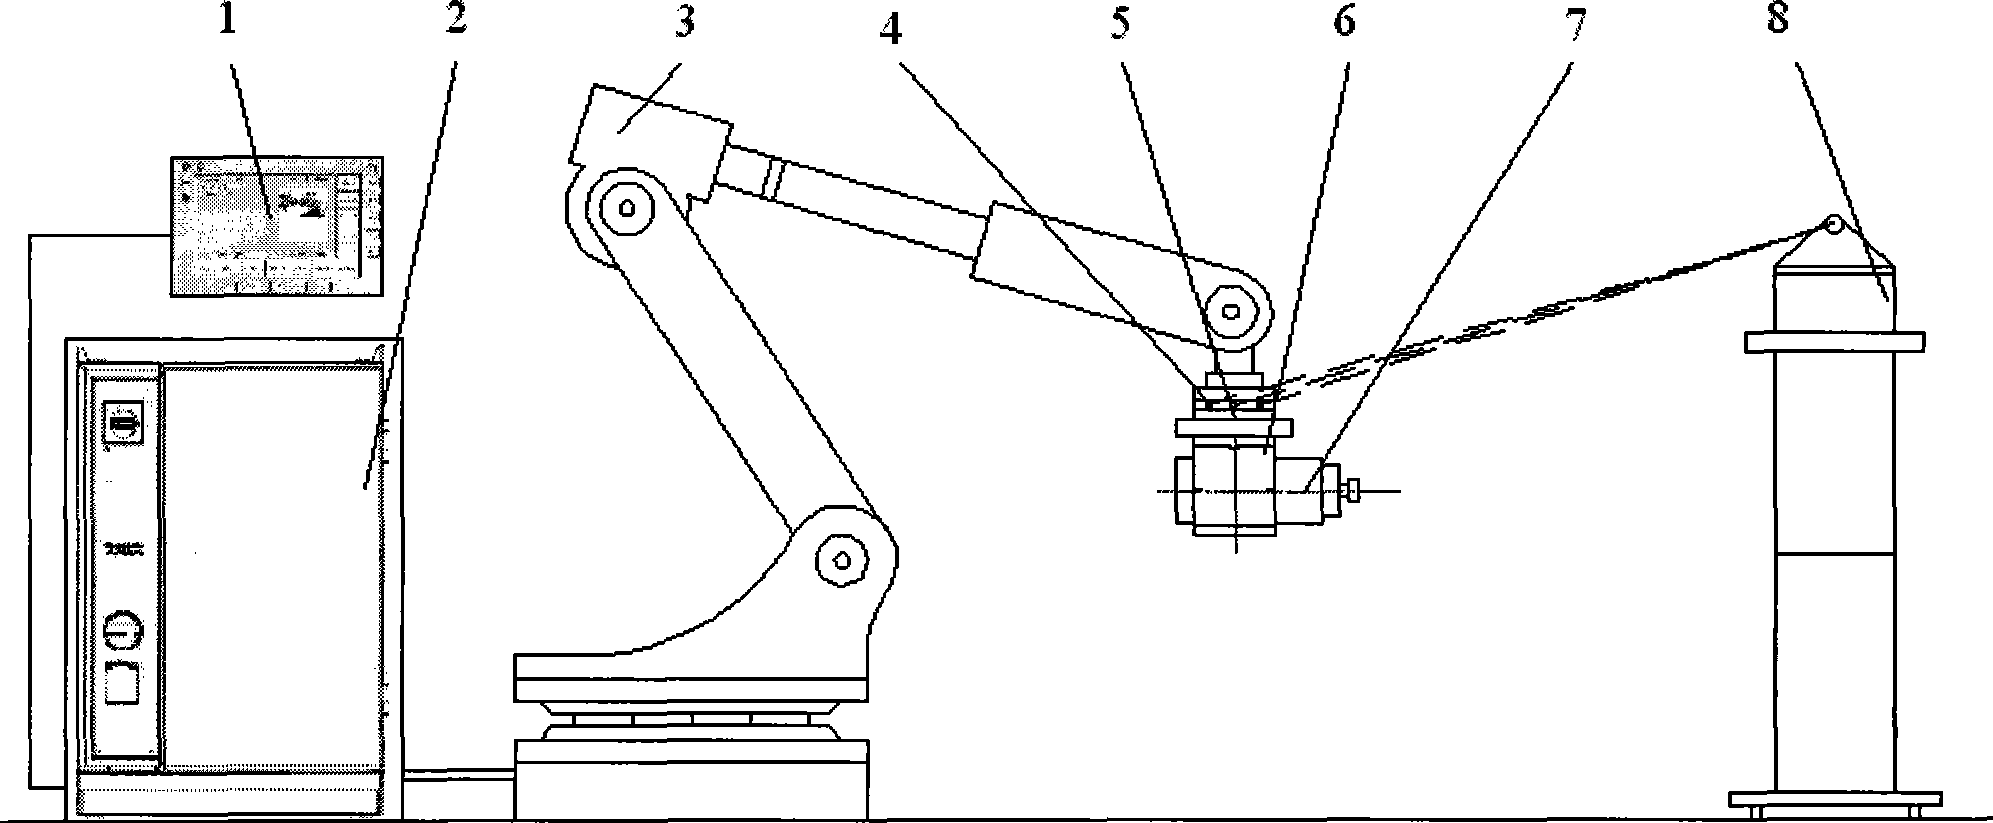 Industrial robot cutting and processing system applied to auxiliary assembly of airplane as well as method